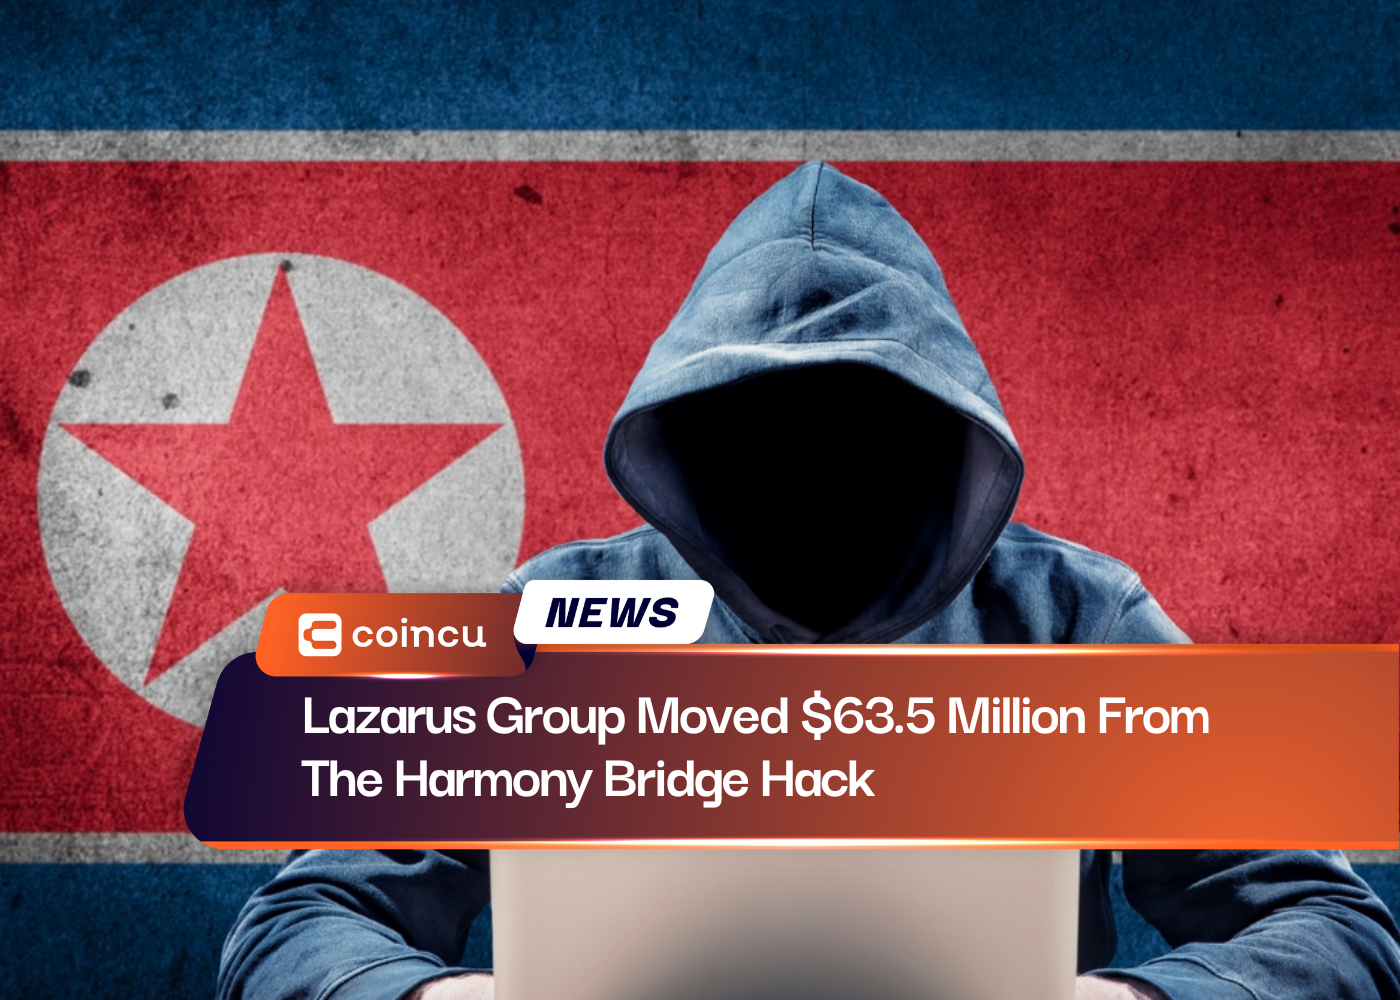 Lazarus Group Moved $63.5 Million From The Harmony Bridge Hack